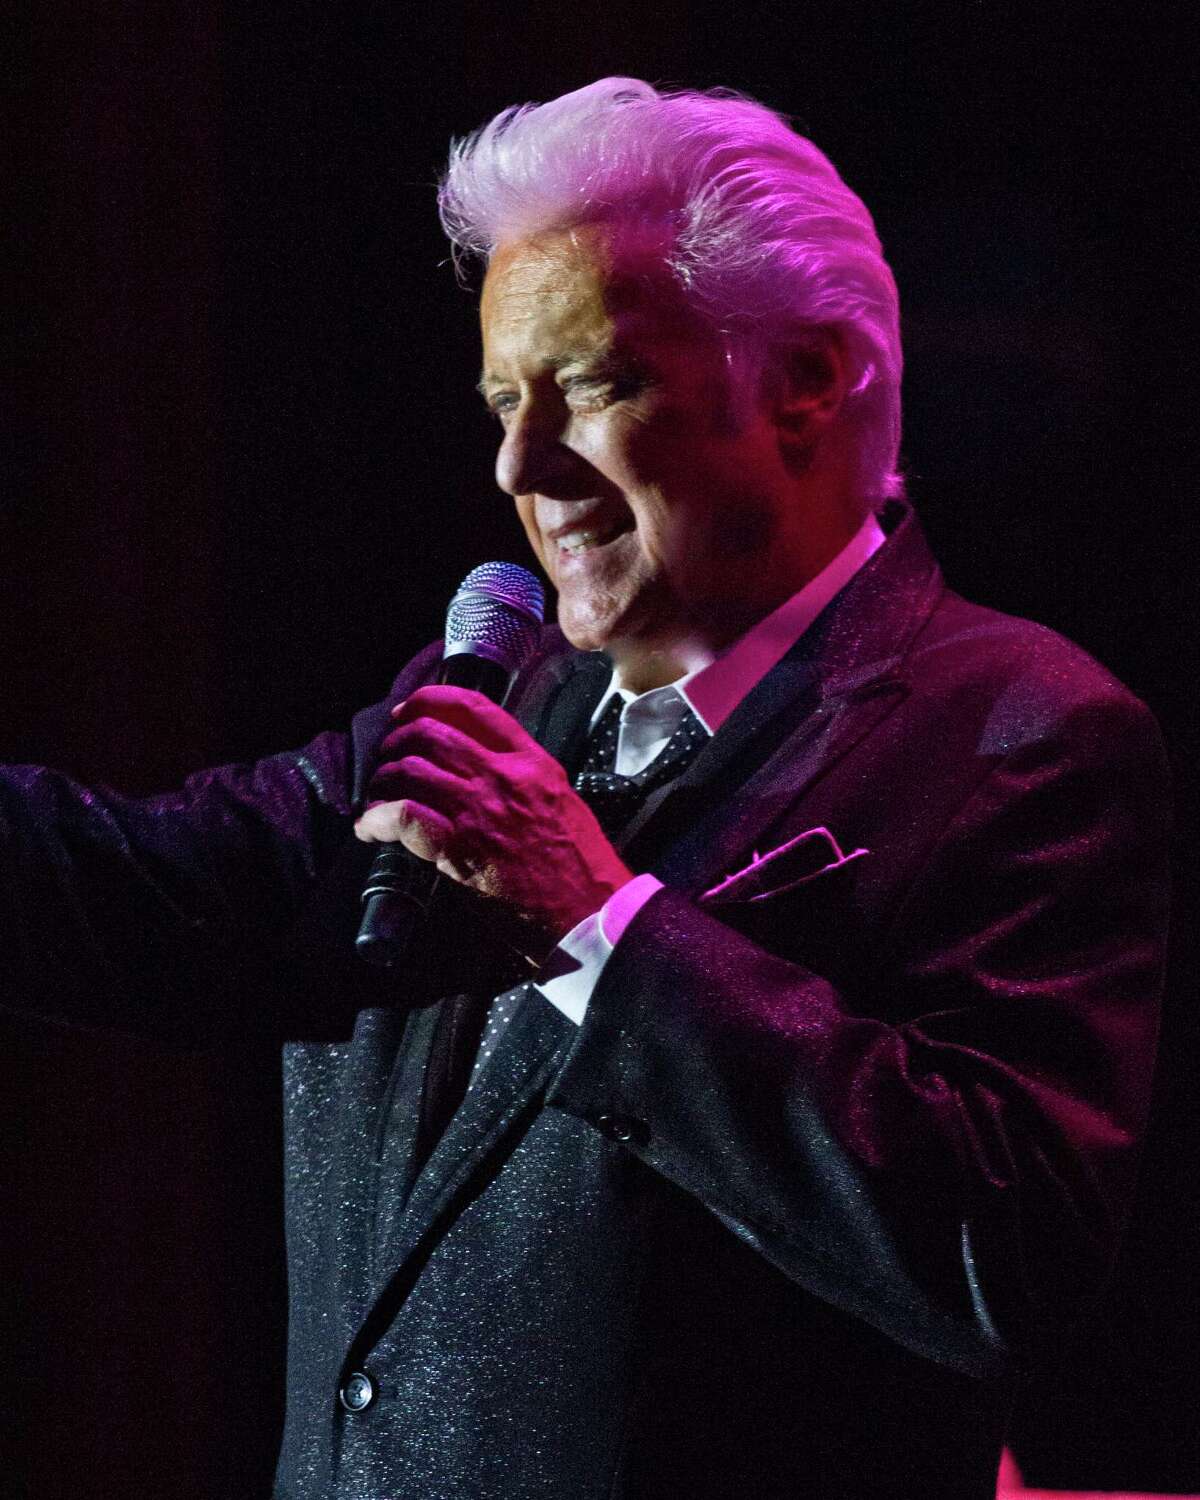 Singer Jack Jones, who performs "I've Got Your Number" on the soundtrack of the recent hit movie "American Hustle," is doing a concert Sunday, March 16, at the Edgerton Center in Fairfield.